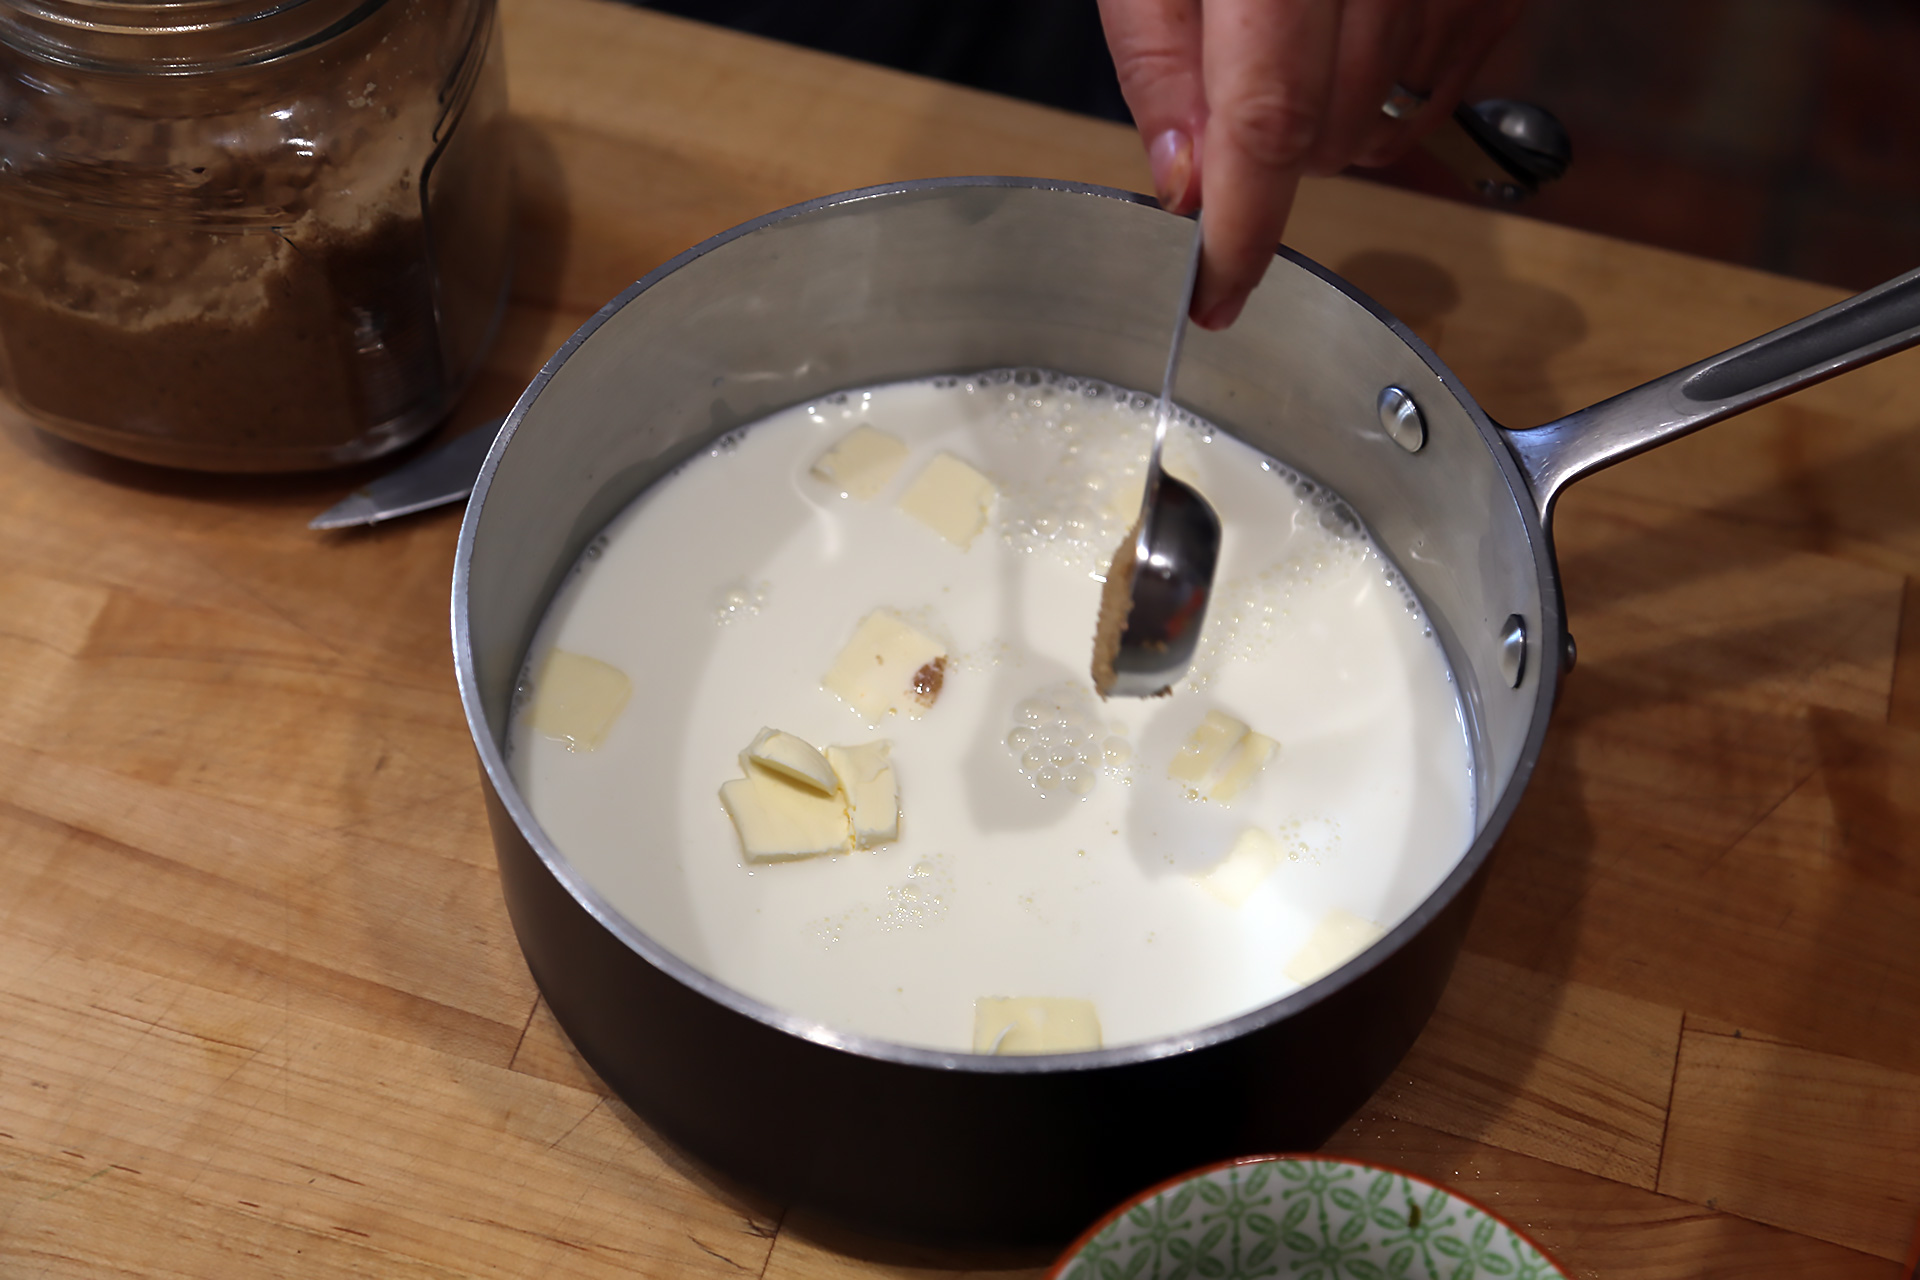 In a saucepan over medium heat, warm the milk, half and half, butter, sugar, and salt until the butter is melted and the mixture is steaming.